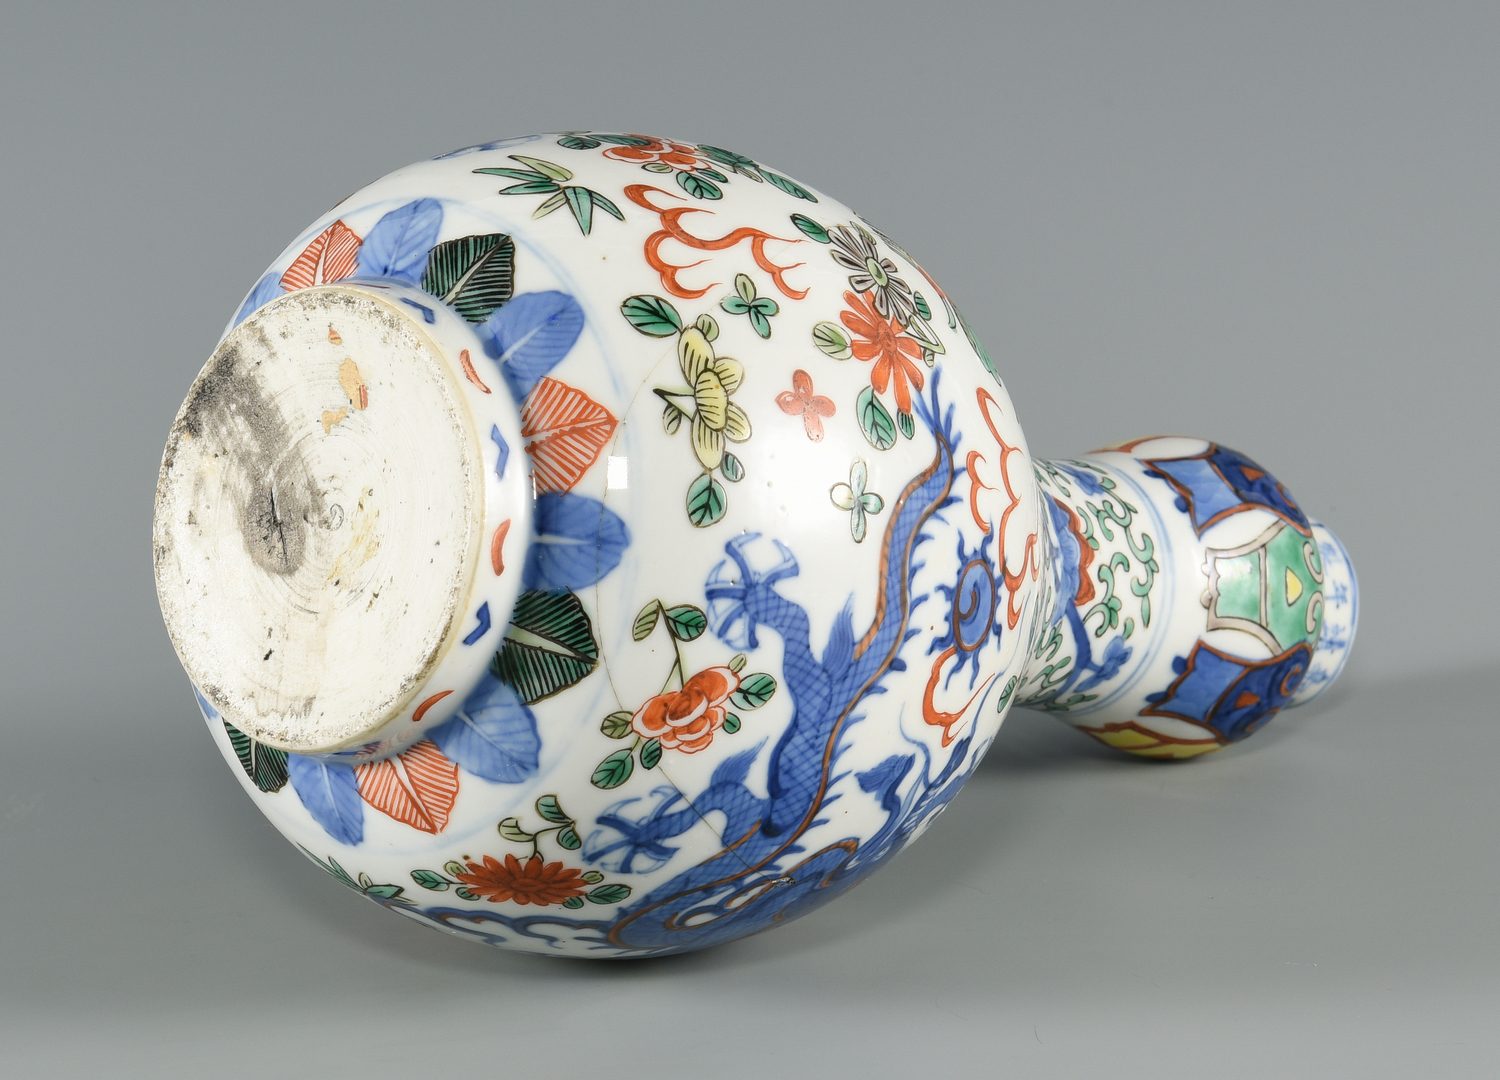 Lot 31: Chinese Doucai Vase & Compote